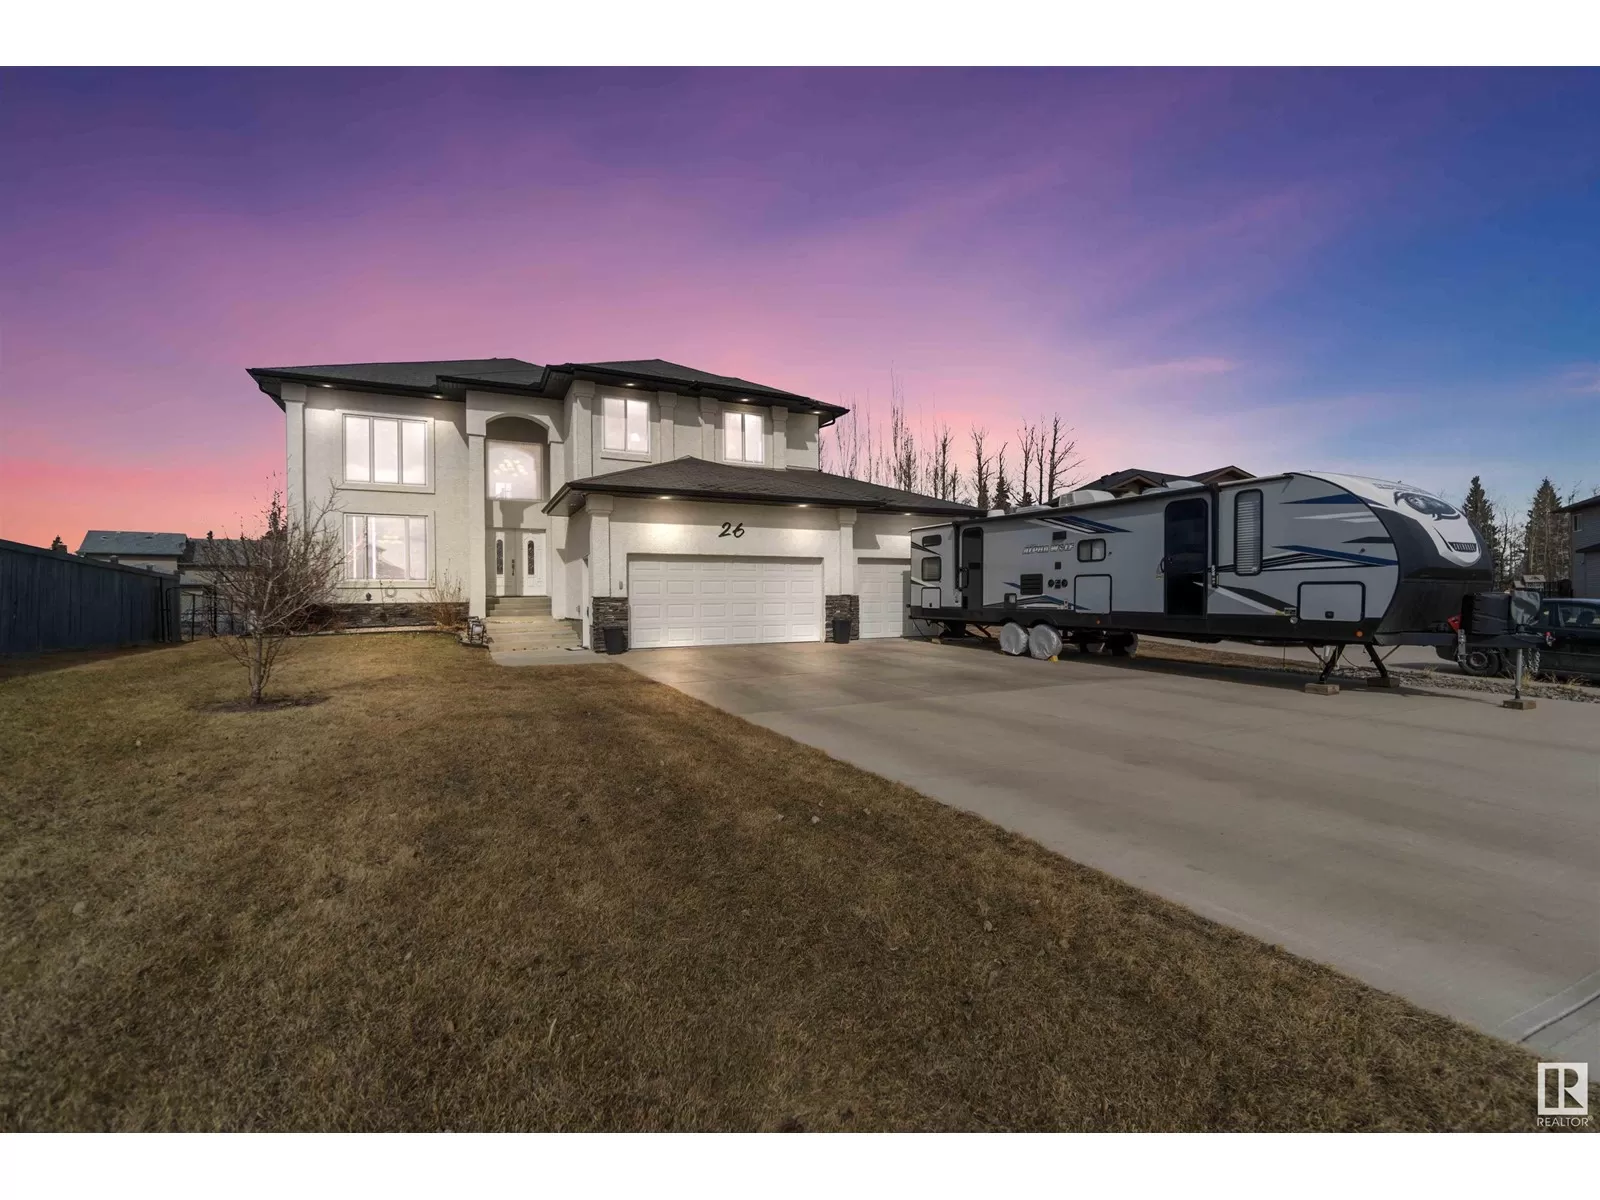 House for rent: 26 Landing Trail, Gibbons, Alberta T0A 1N0